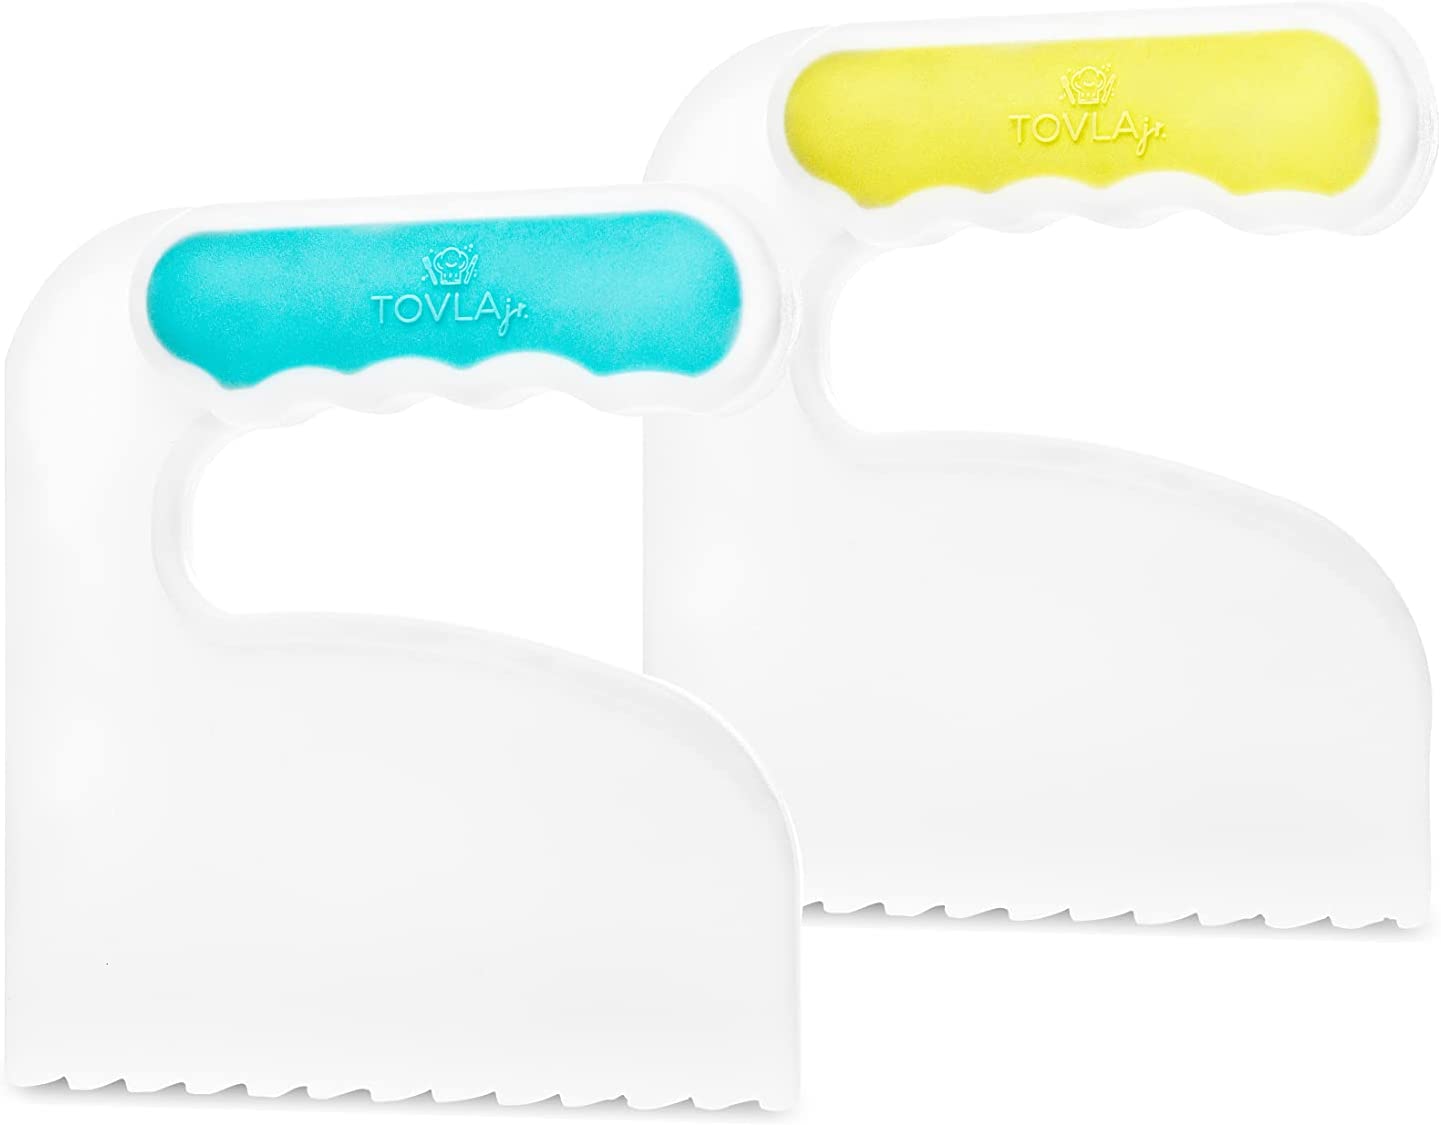  Tovla Jr. Knives for Kids 3-Piece Kitchen Cooking and Baking  Knife Set: Montessori Children's Knives in 3 Sizes & Colors/Firm Grip,  Serrated Edges, BPA-Free Kids' Toddler Knives (colors vary): Home 